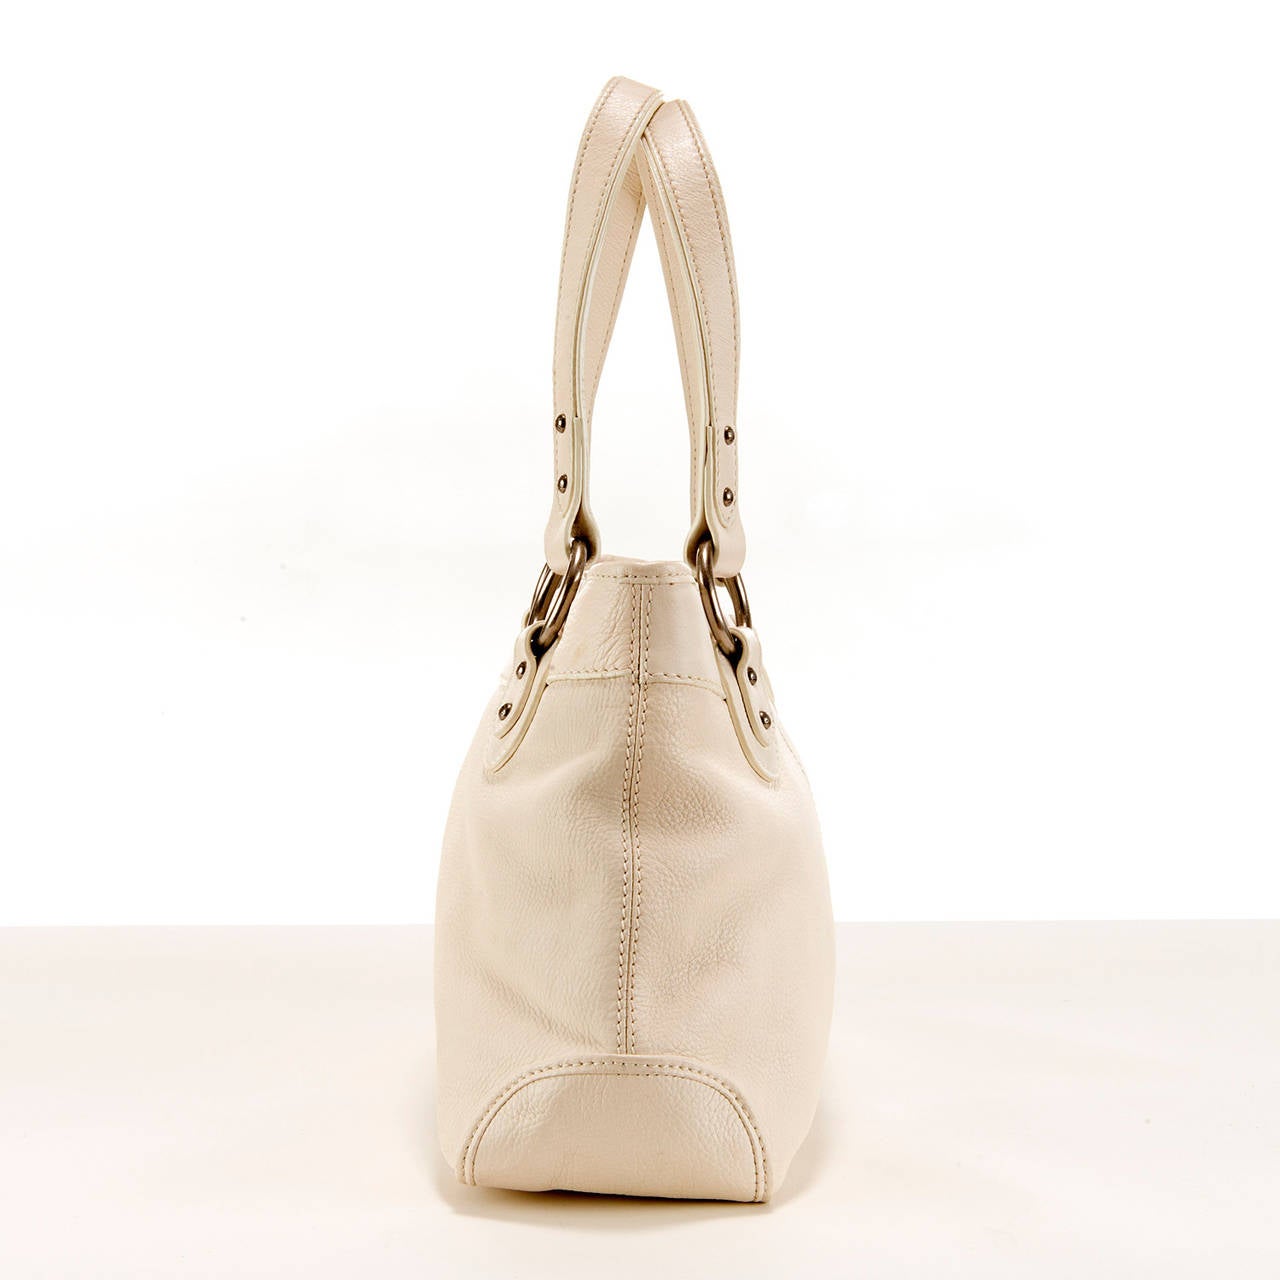 This Jaeger of London, Large Cream coloured Tote, is made in soft, grained calfskin, with silver palladium hardware. In 'New-unused' condition, this bag is a great addition for your Spring/Summer wardrobe and will complement lots of different